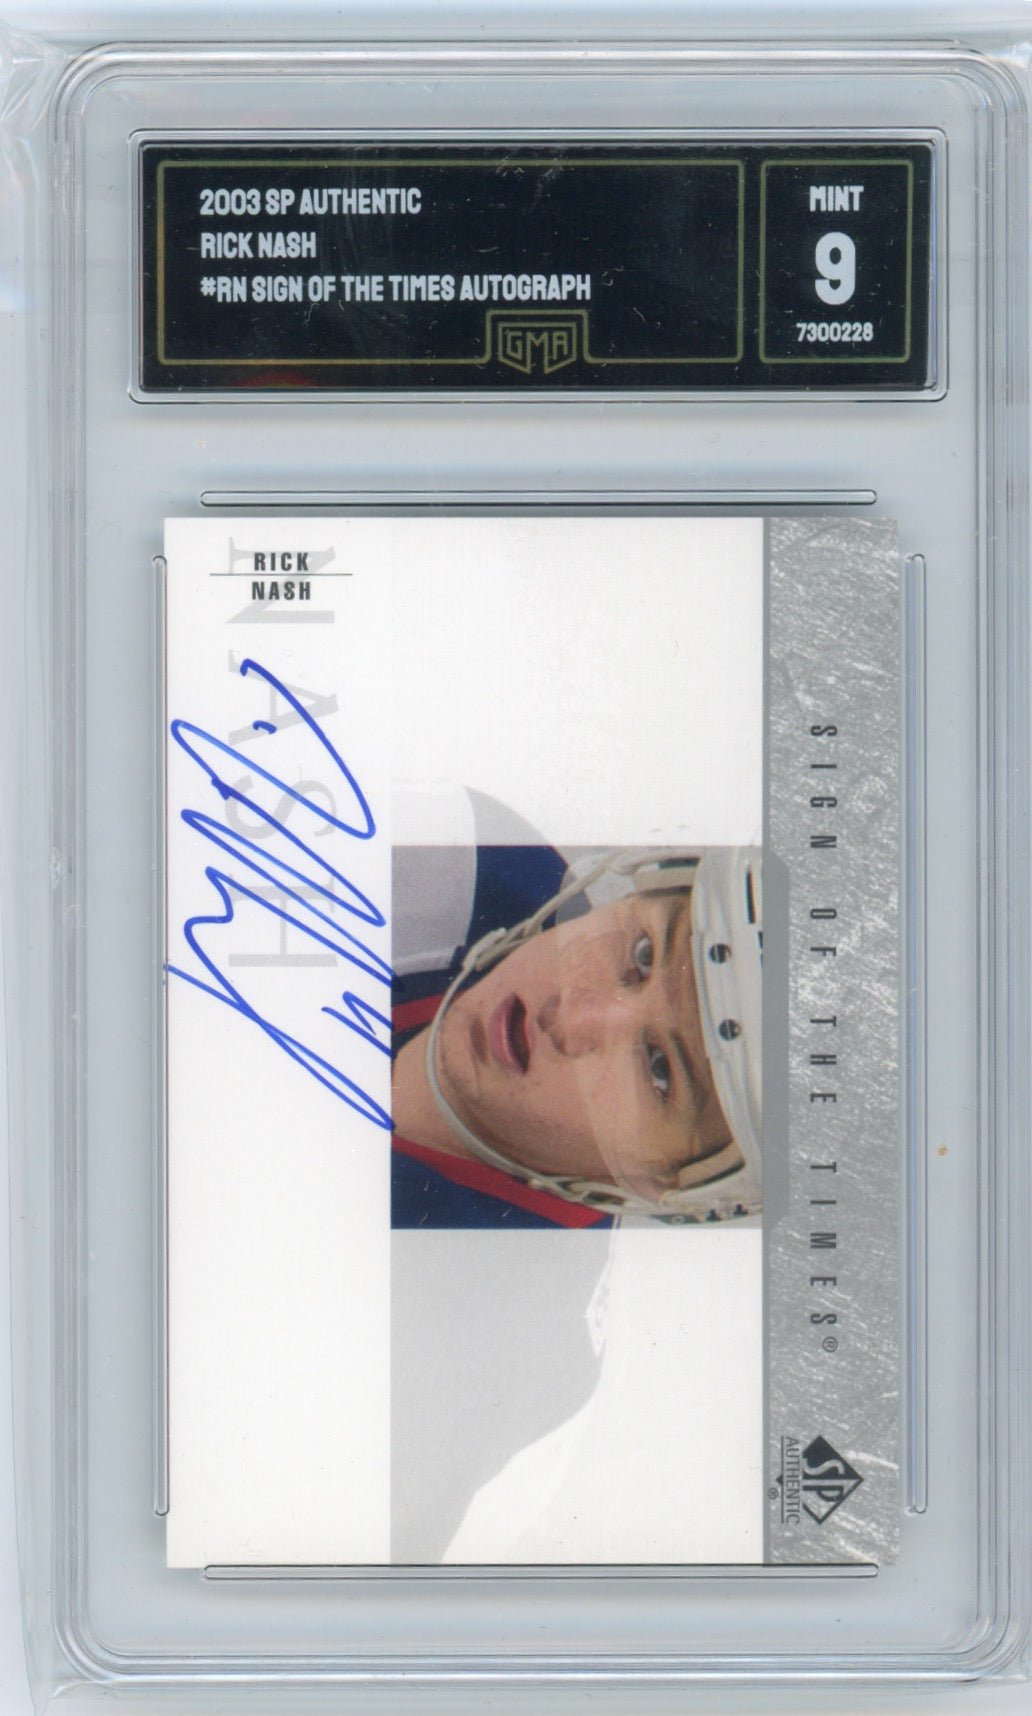 2003 SP Authentic Rick Nash #RN Sign Of The Times Autograph GMA 9